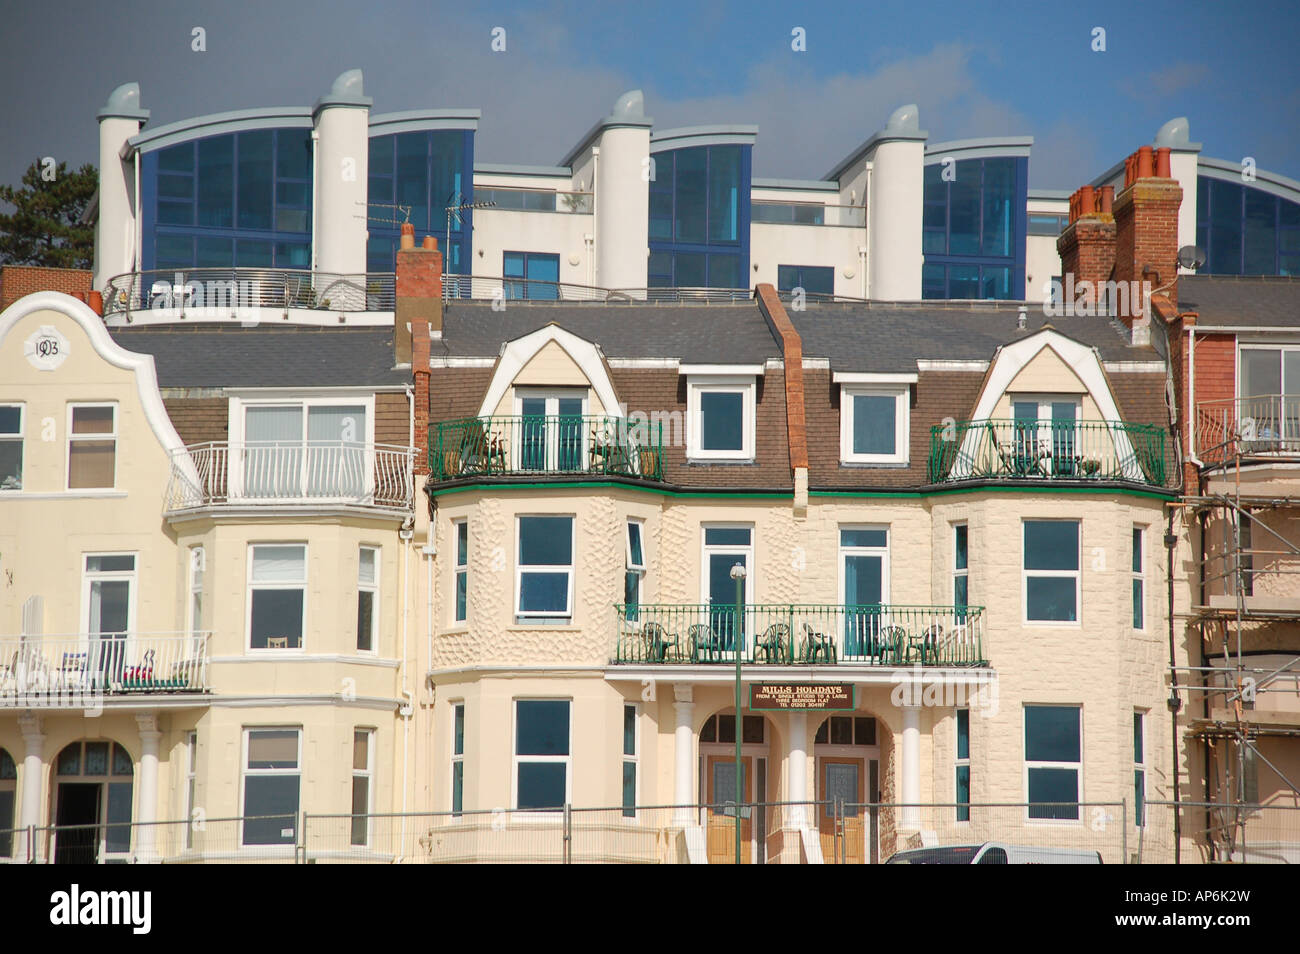 20th to 21st century housing contrast in Boscombe Dorset England UK coast residential architecture buildings Stock Photo